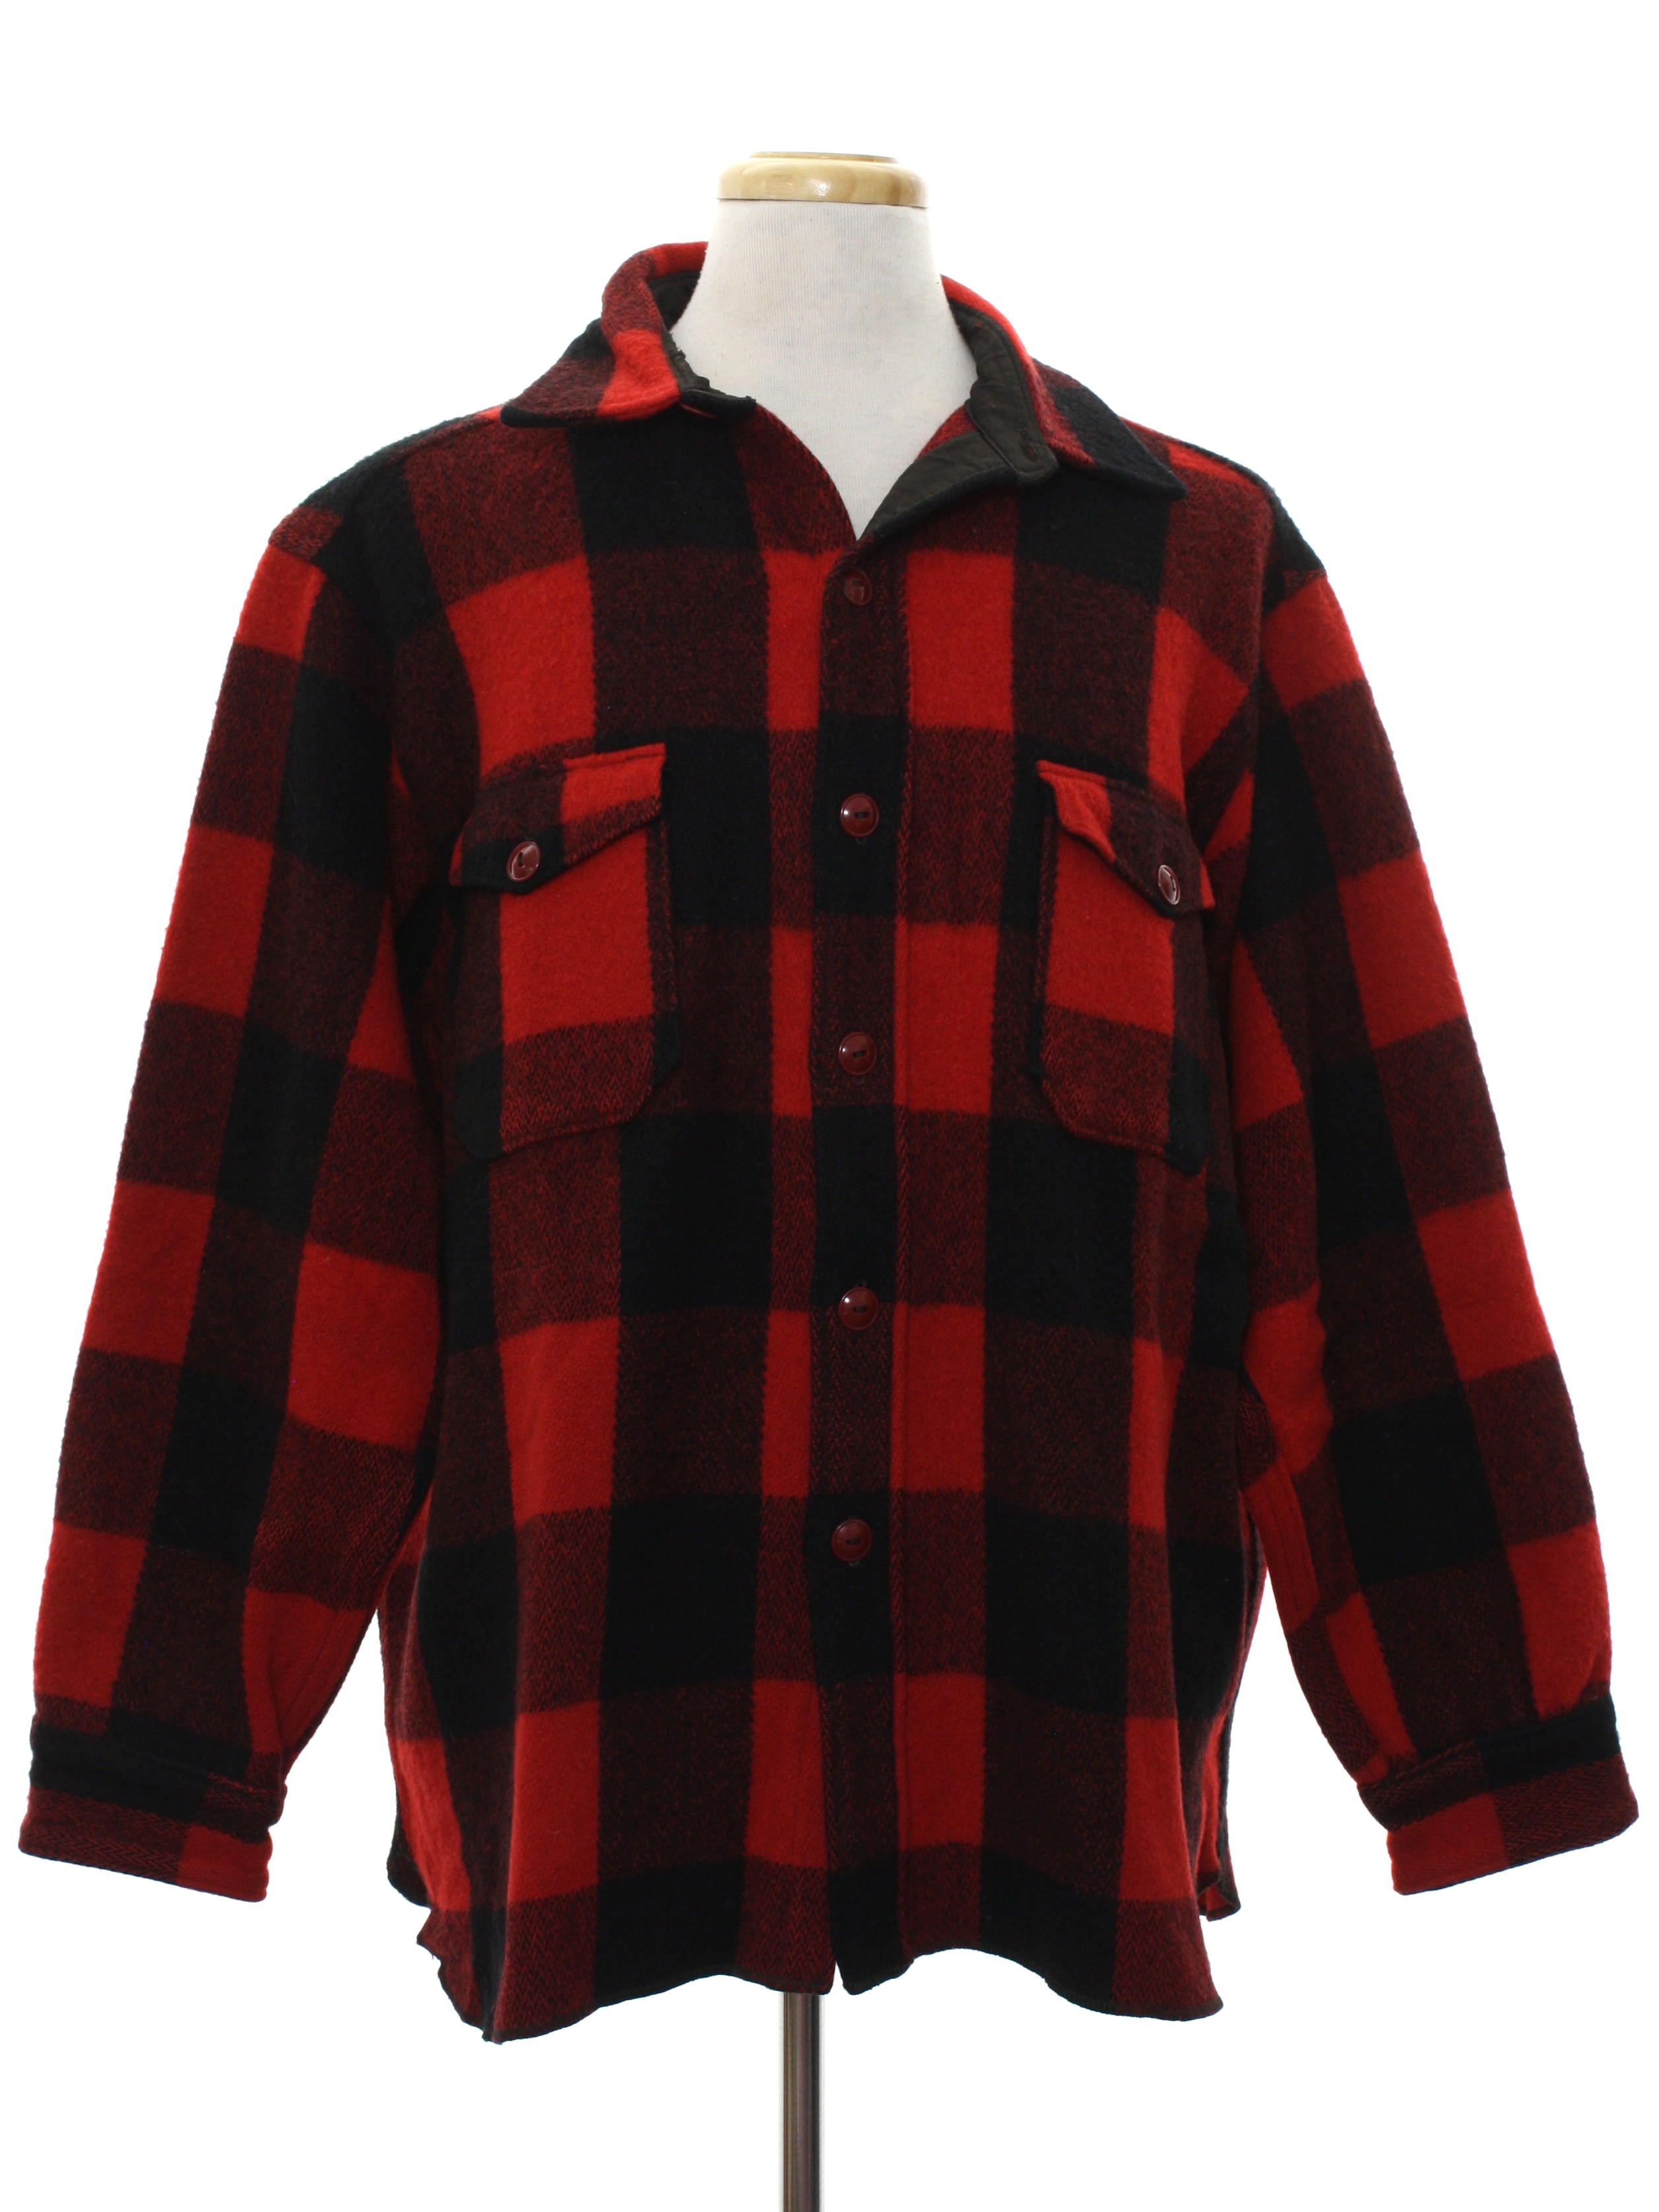 1960's Wool Shirt (Woolrich): Late 60s -Woolrich- Mens red and black ...